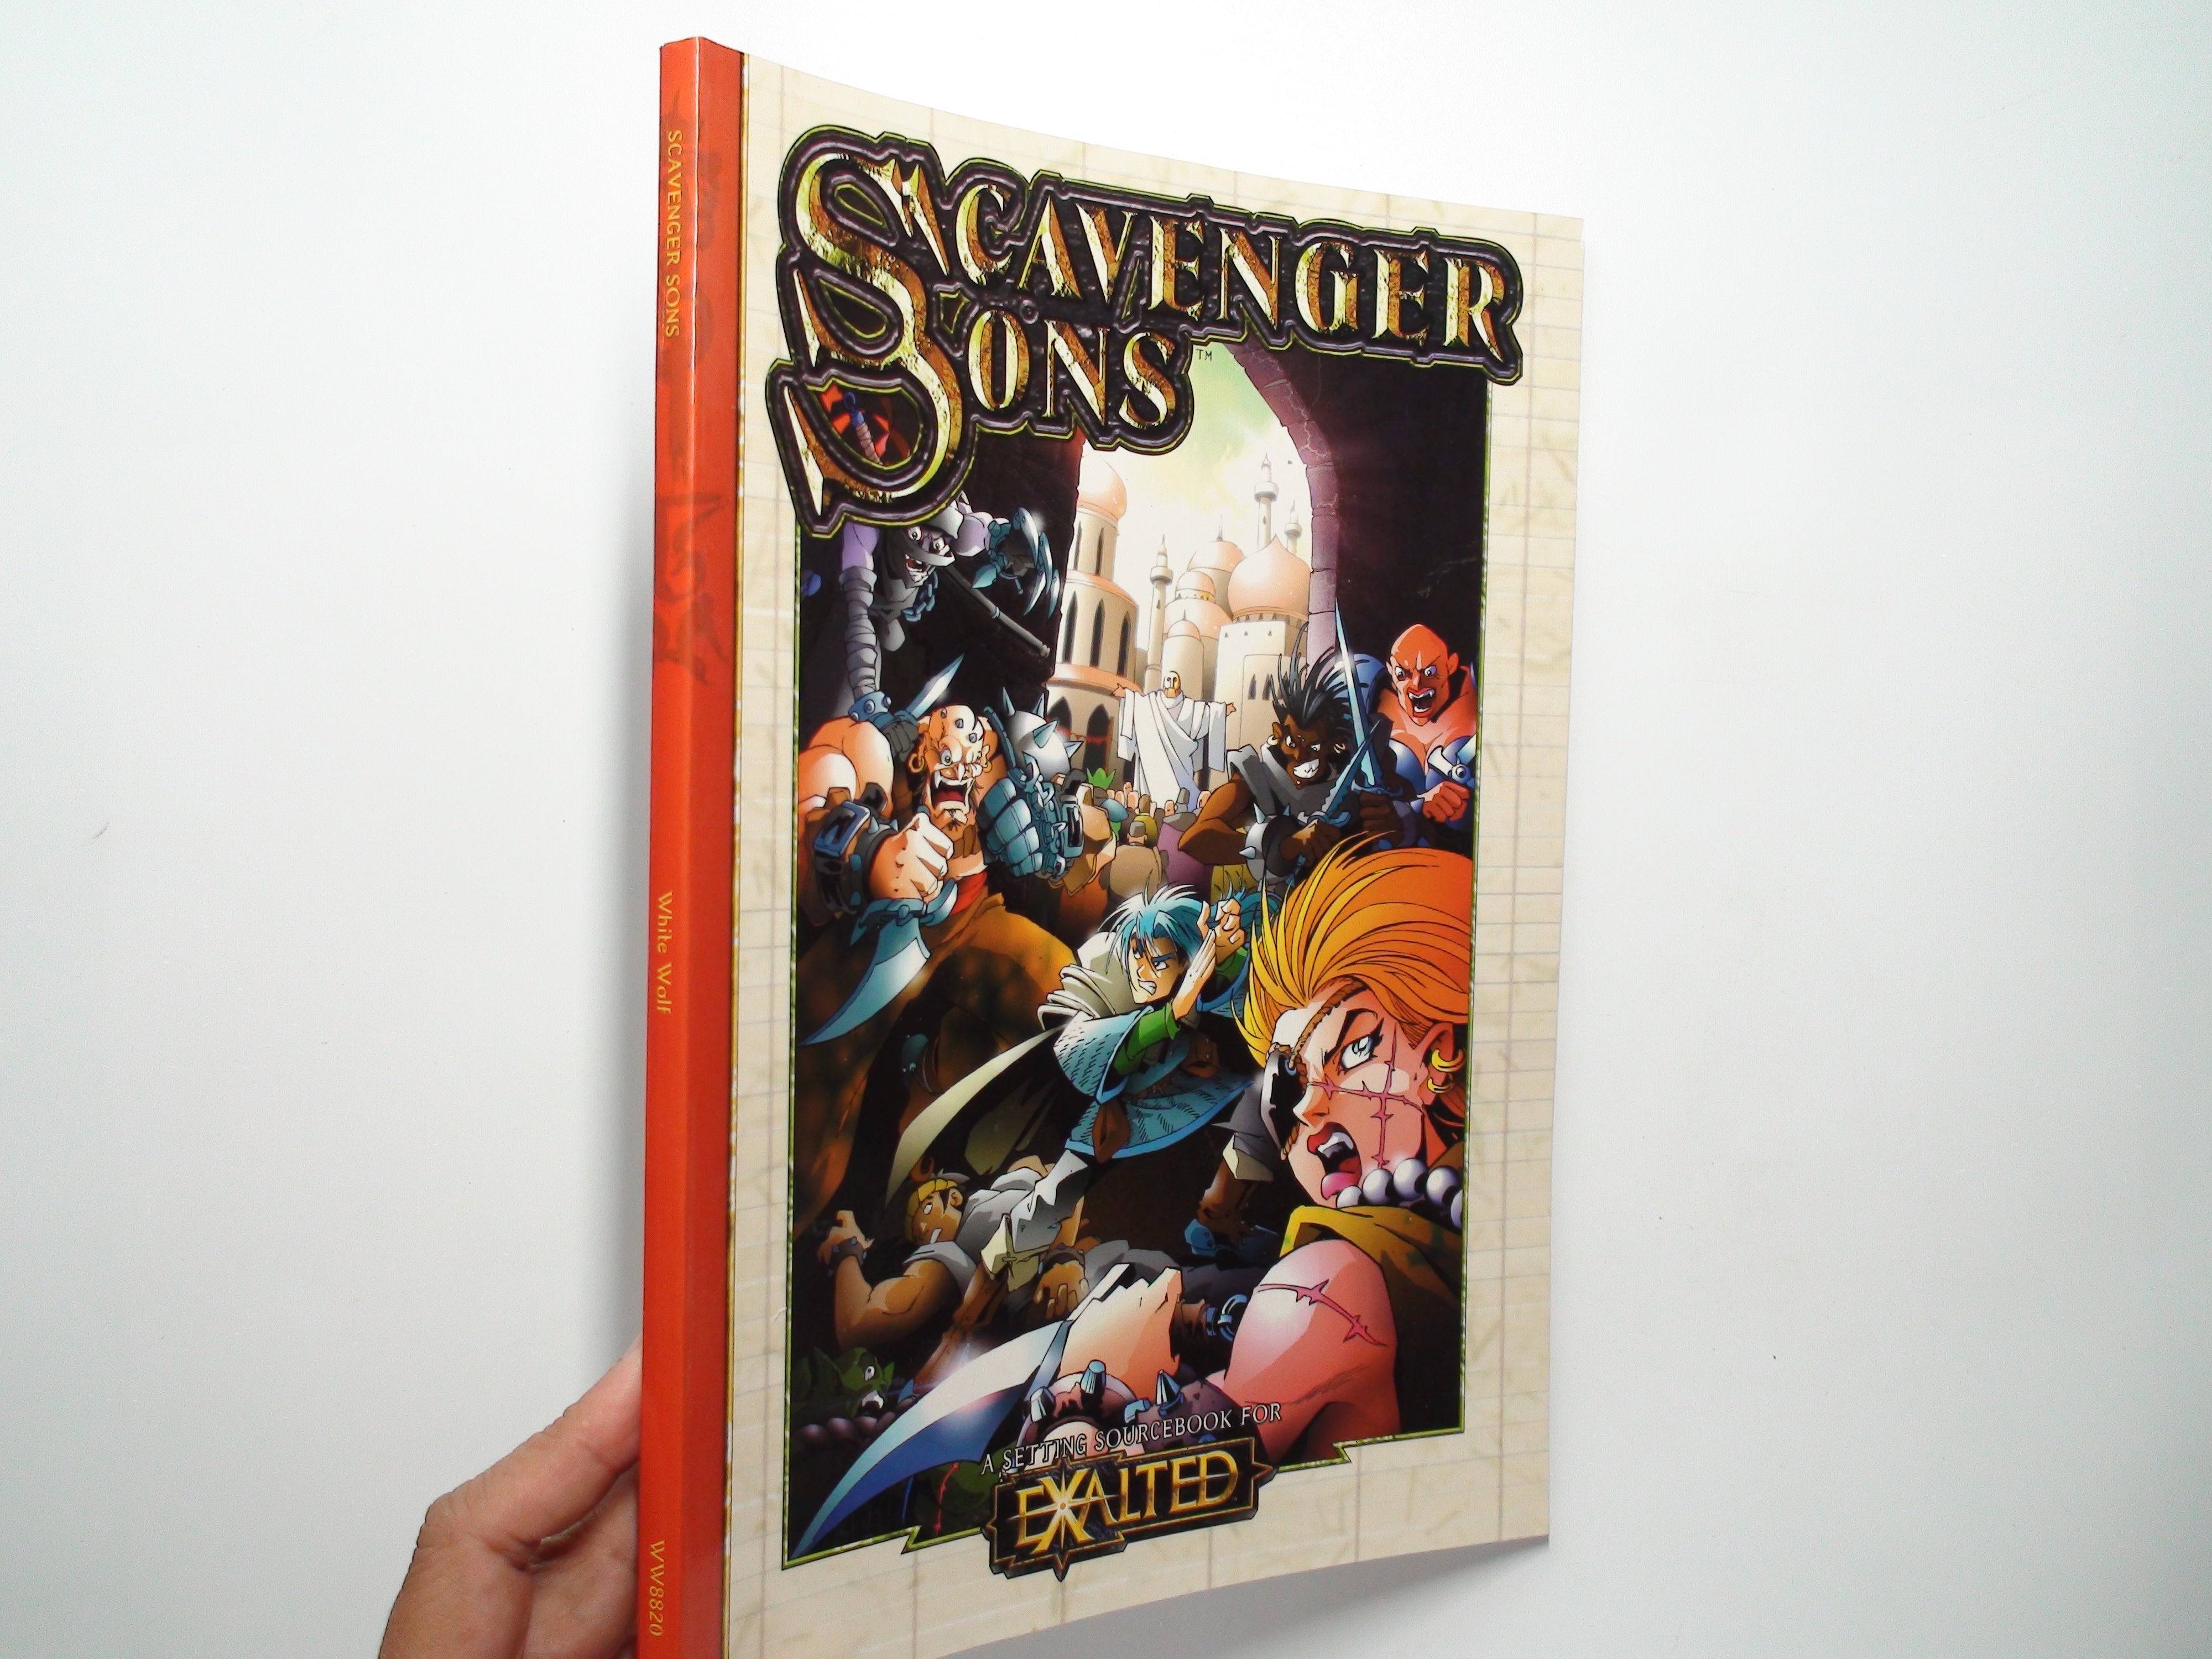 Scavenger Sons, By Justin Achilli, Exalted, White Wolf, 1st Ed, RPG, 2001